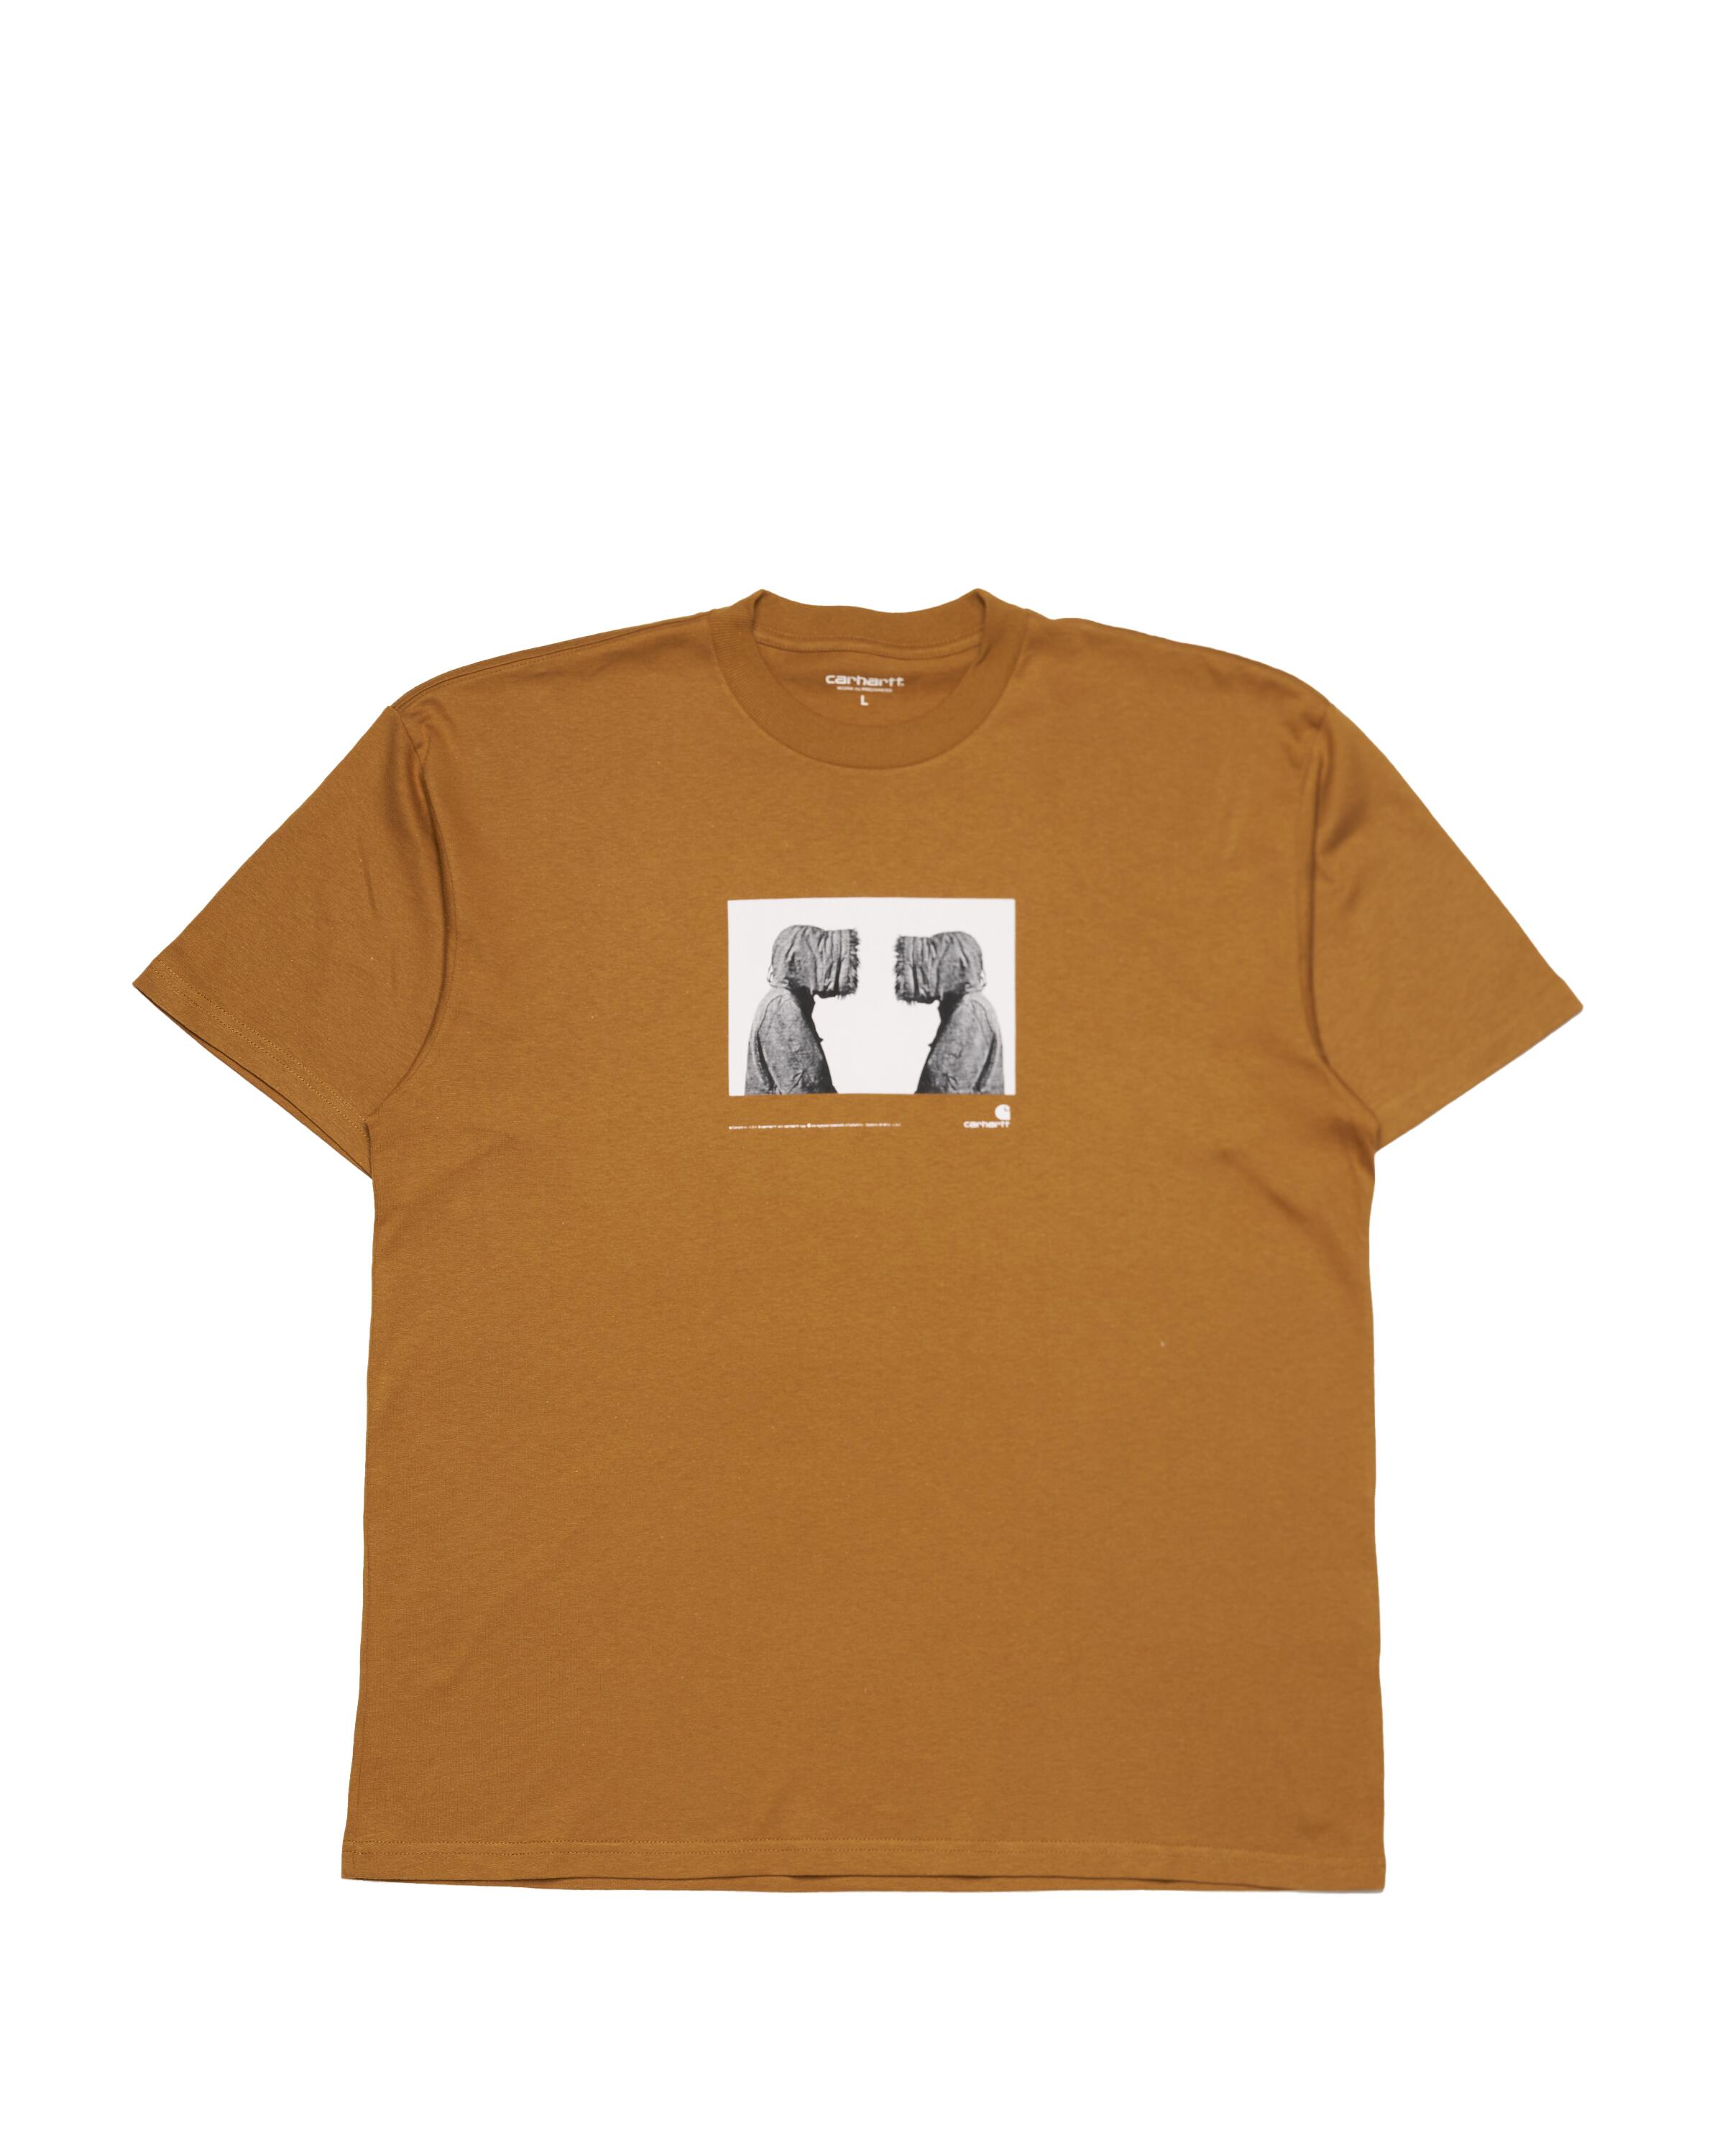 carhartt wip s/s cold t-shirt